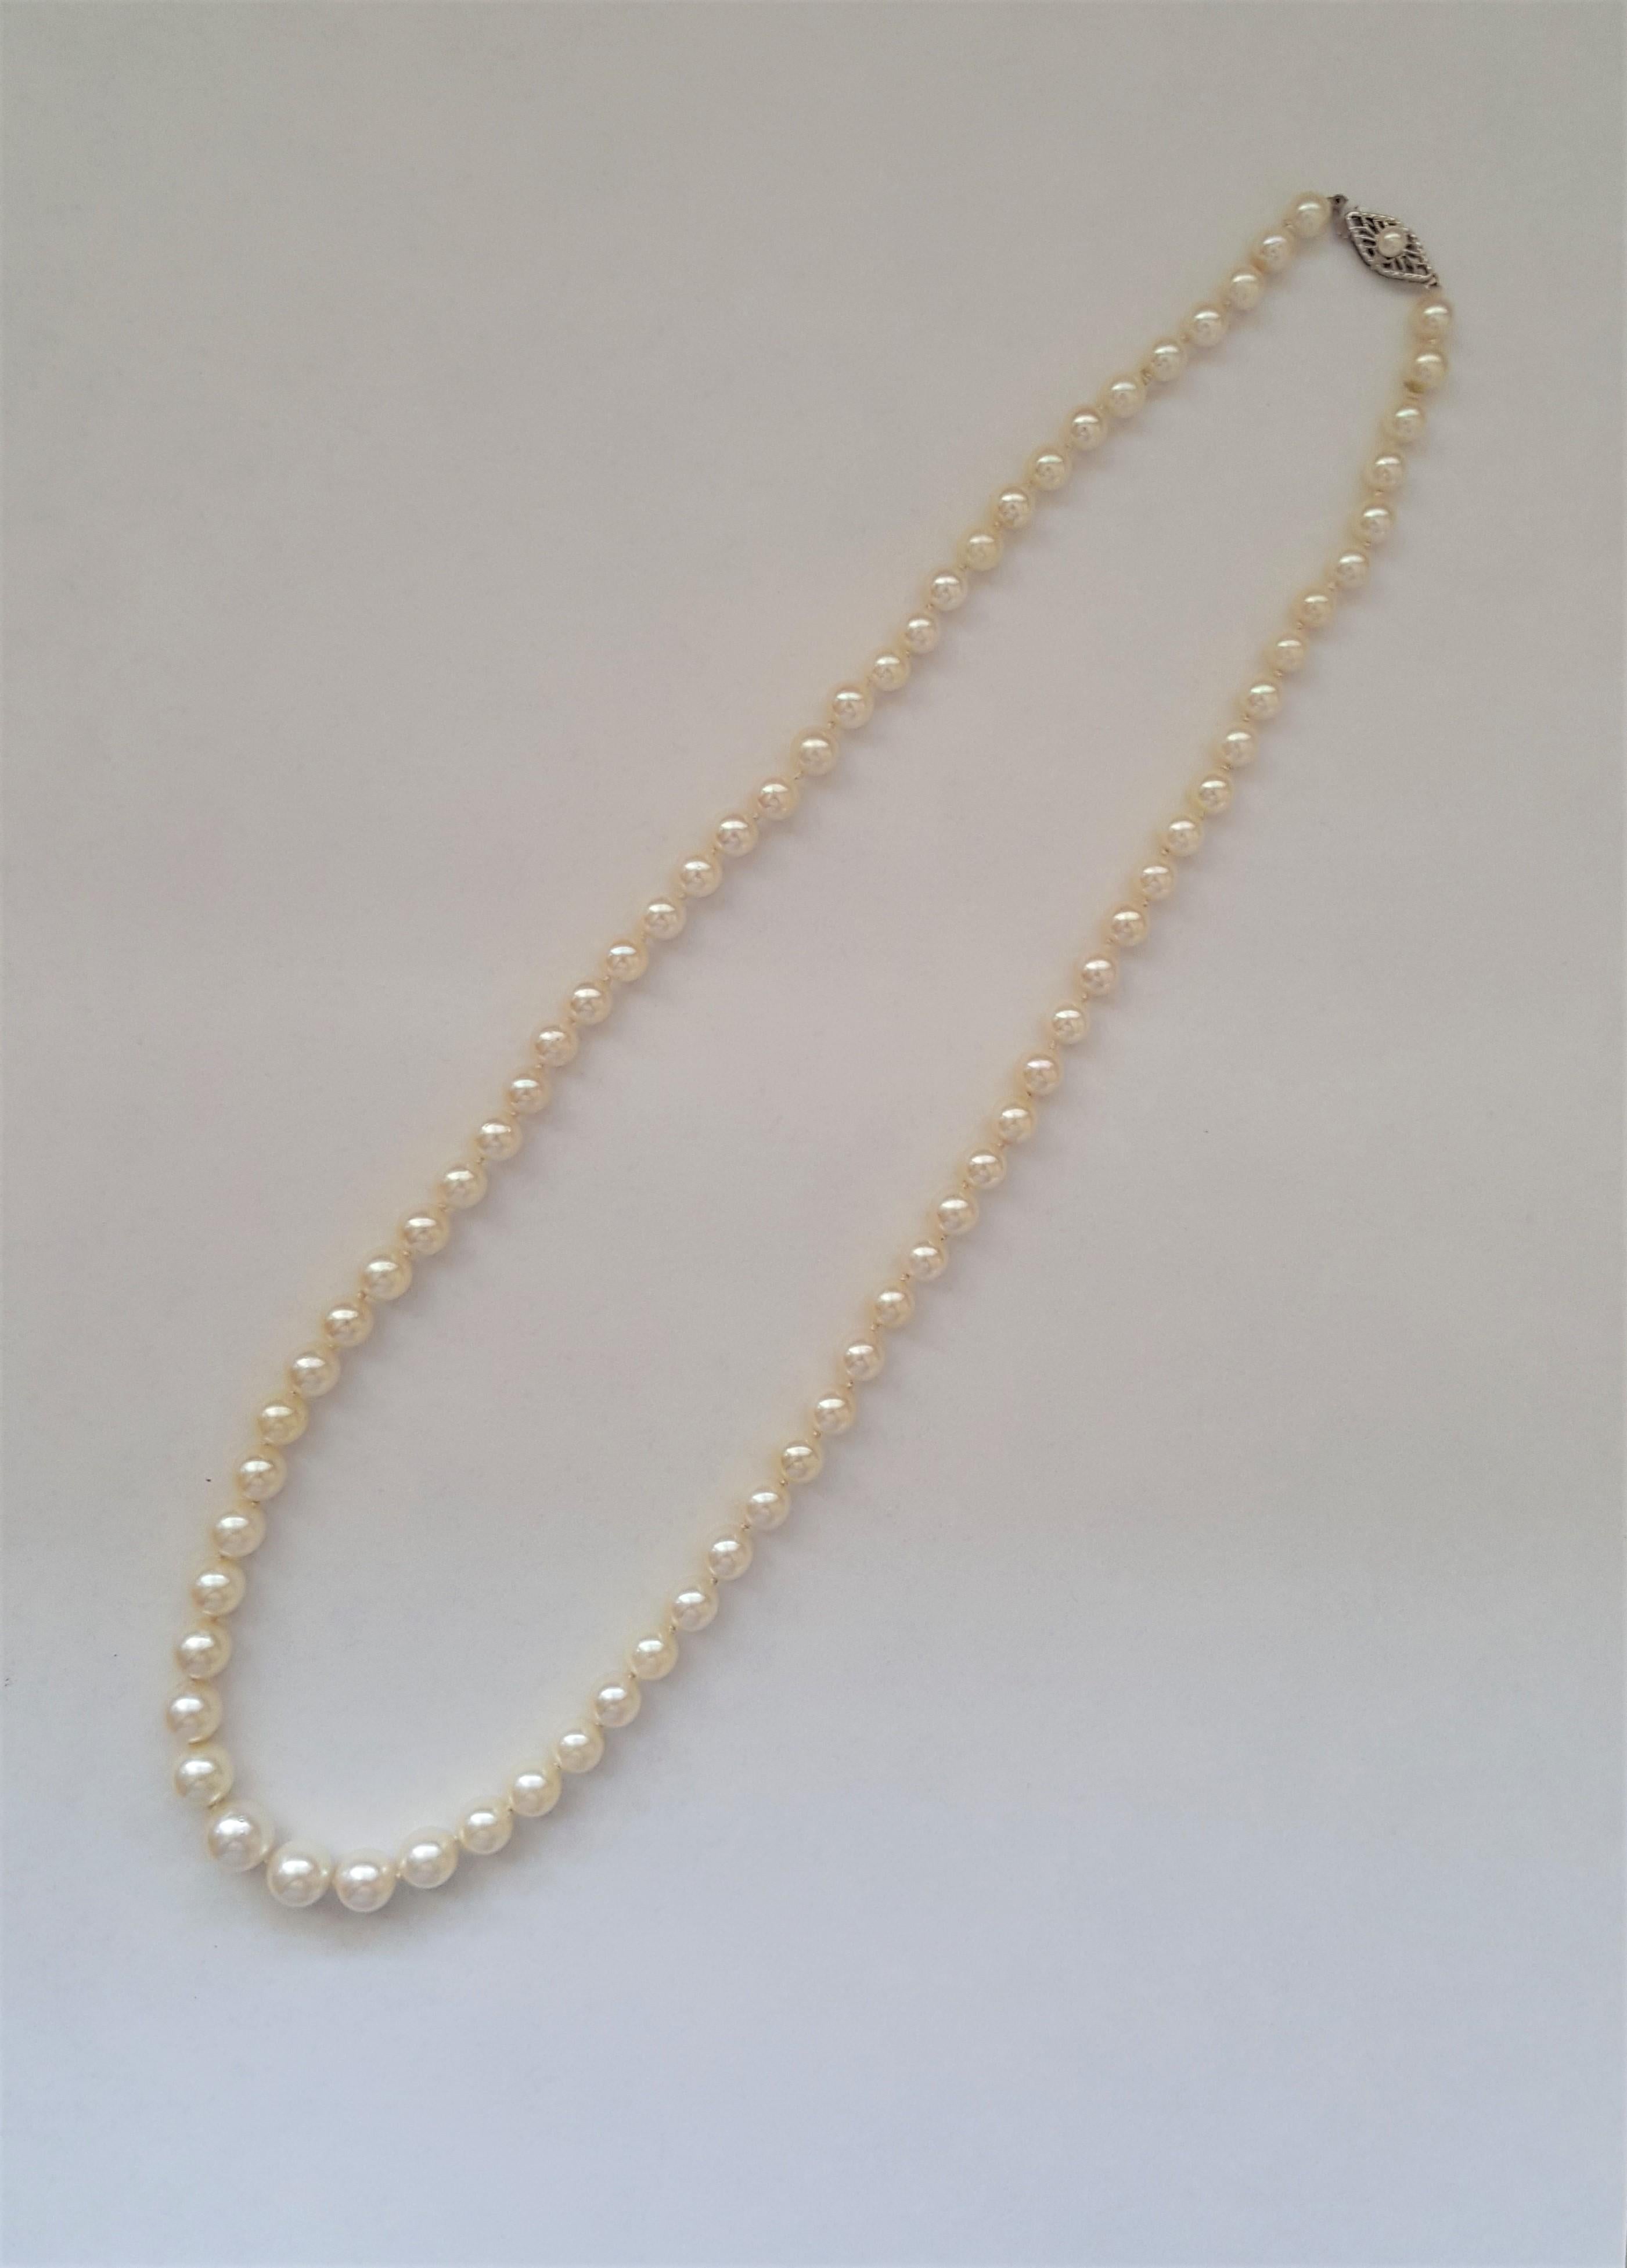 A beautiful 20-inch strand of grade AA creamy white pearls that taper in size from 4.5mm to 8.5mm. The pearls are in very good condition with a clean nacre and rich luster; the strand is secured with a 14kt white gold pearl clasp with a small pearl.